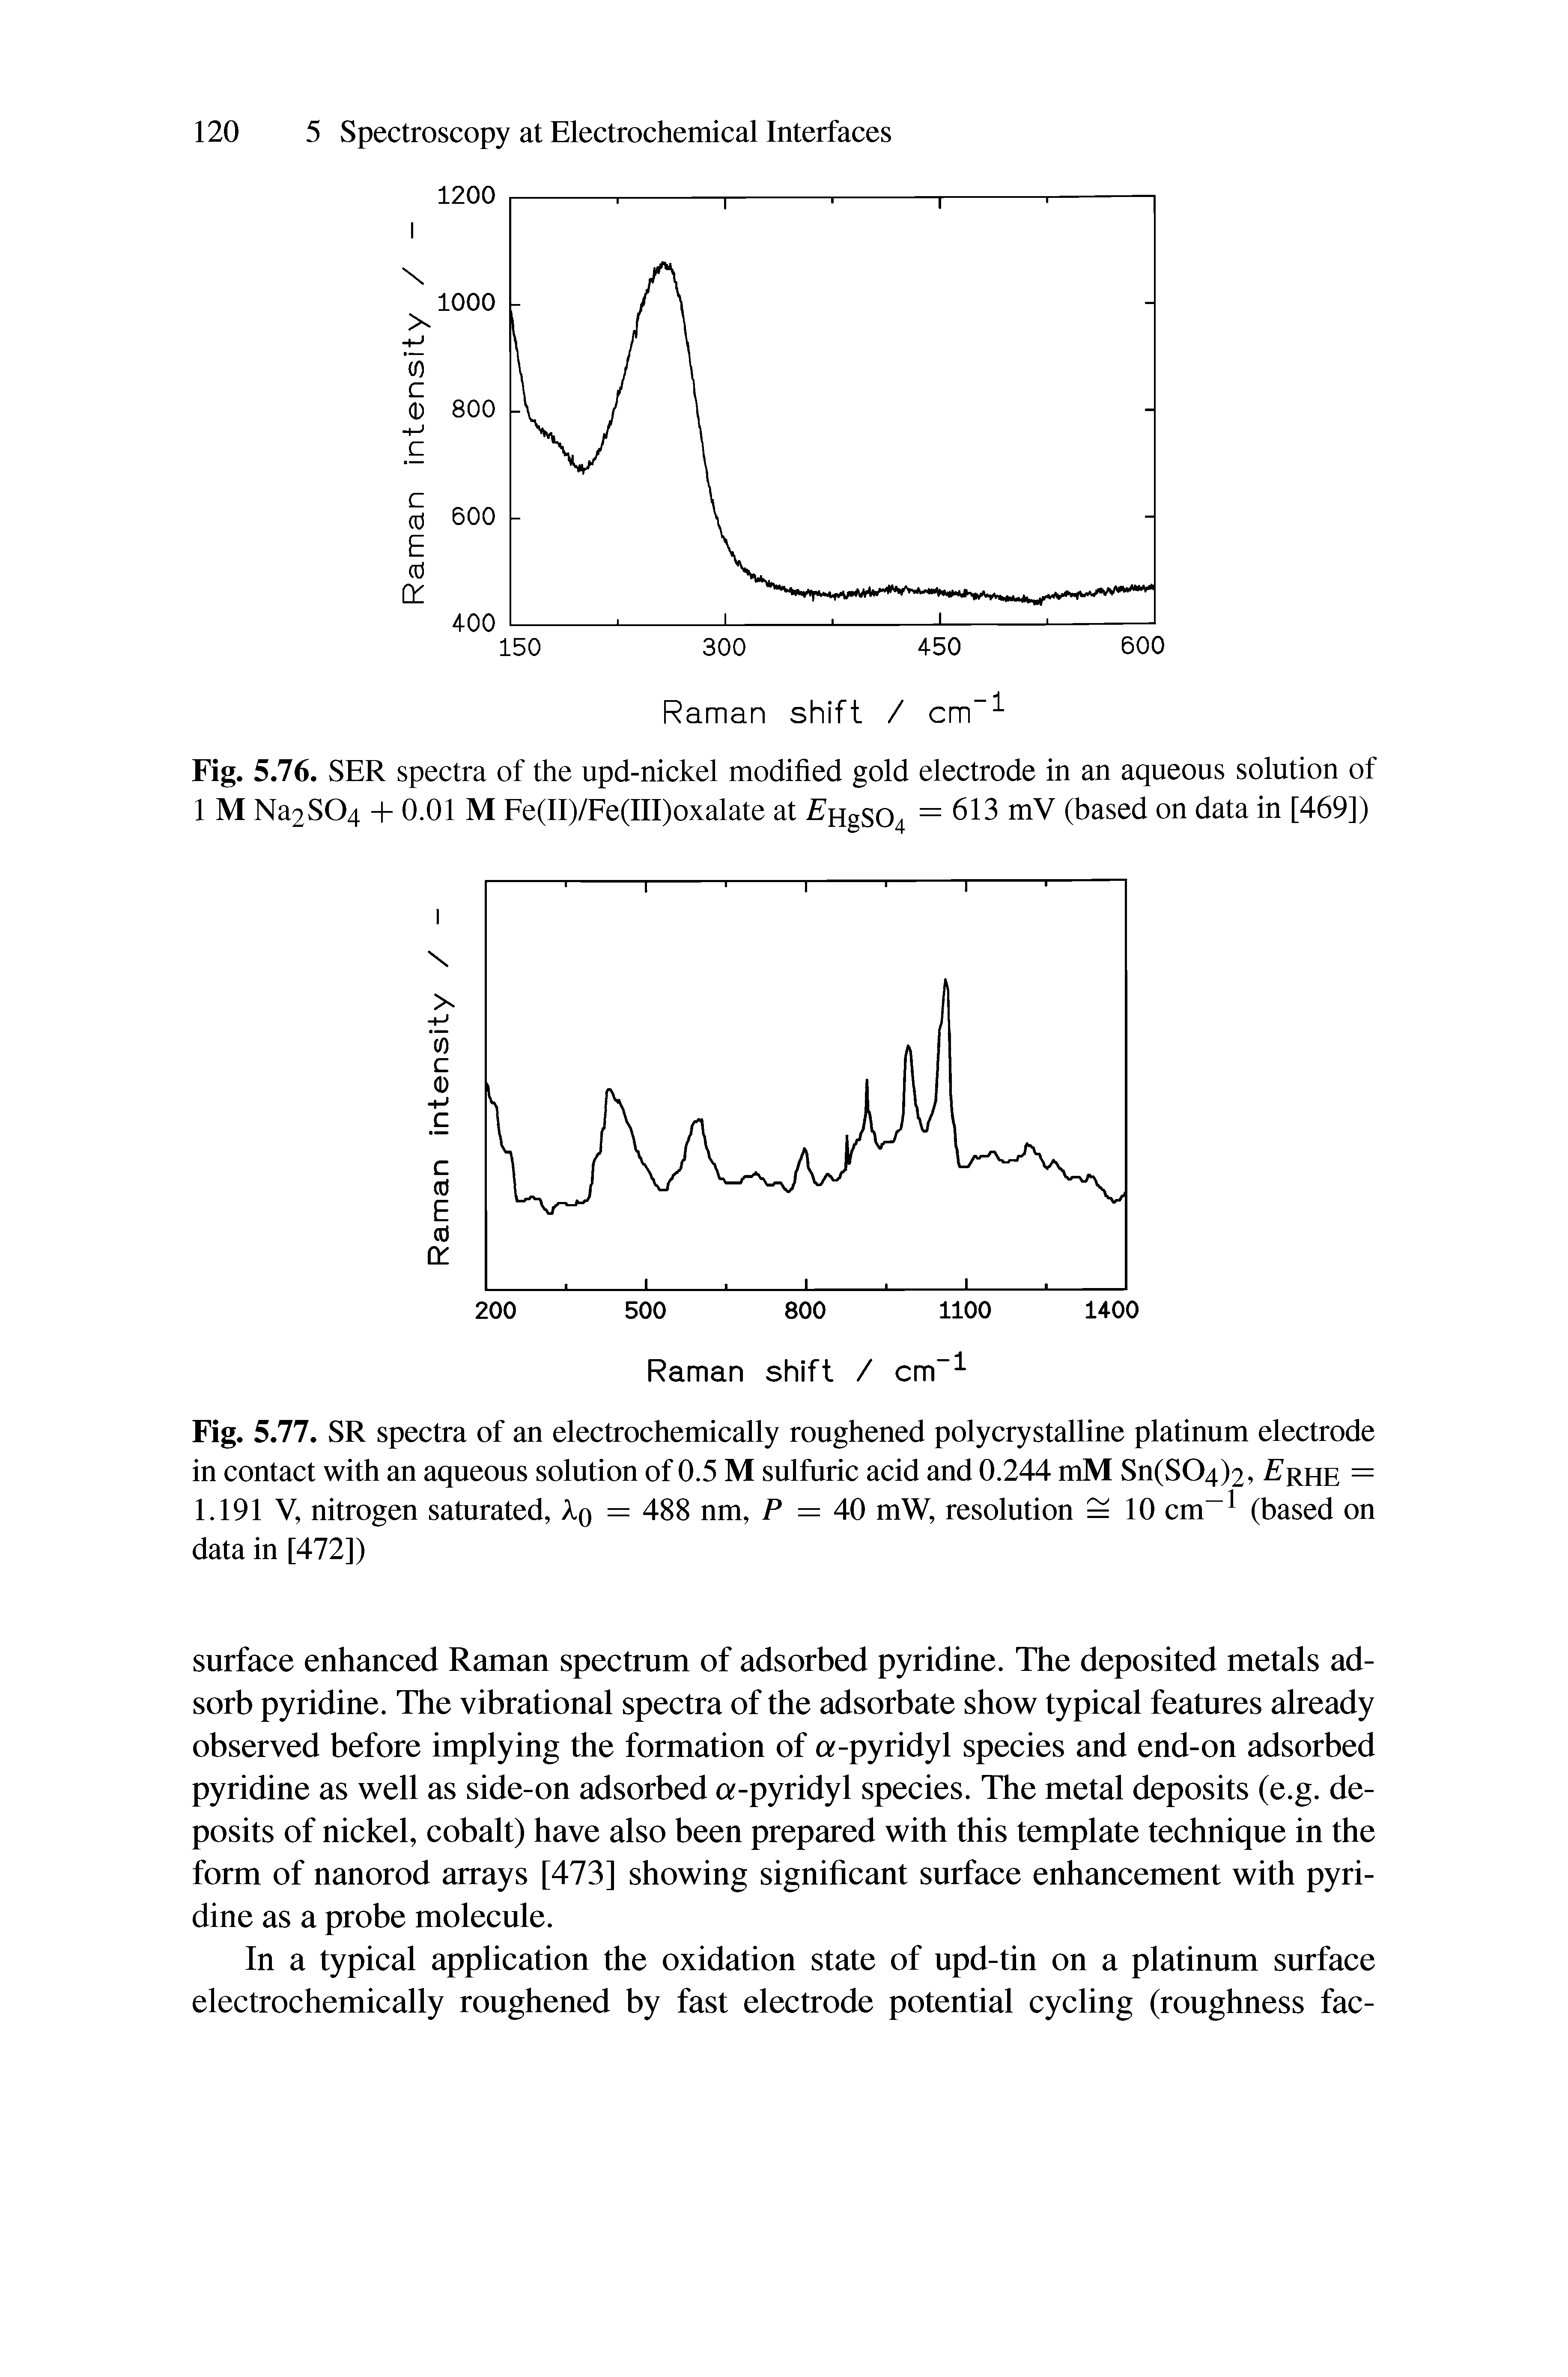 Fig. 5.77. SR spectra of an electrochemically roughened polycrystalline platinum electrode in contact with an aqueous solution of 0.5 M sulfuric acid and 0.244 mM Sn(S04)2, Frhe = 1.191 V, nitrogen saturated, Aq = 488 nm, P = 40 mW, resolution =10 cm (based on data in [472])...